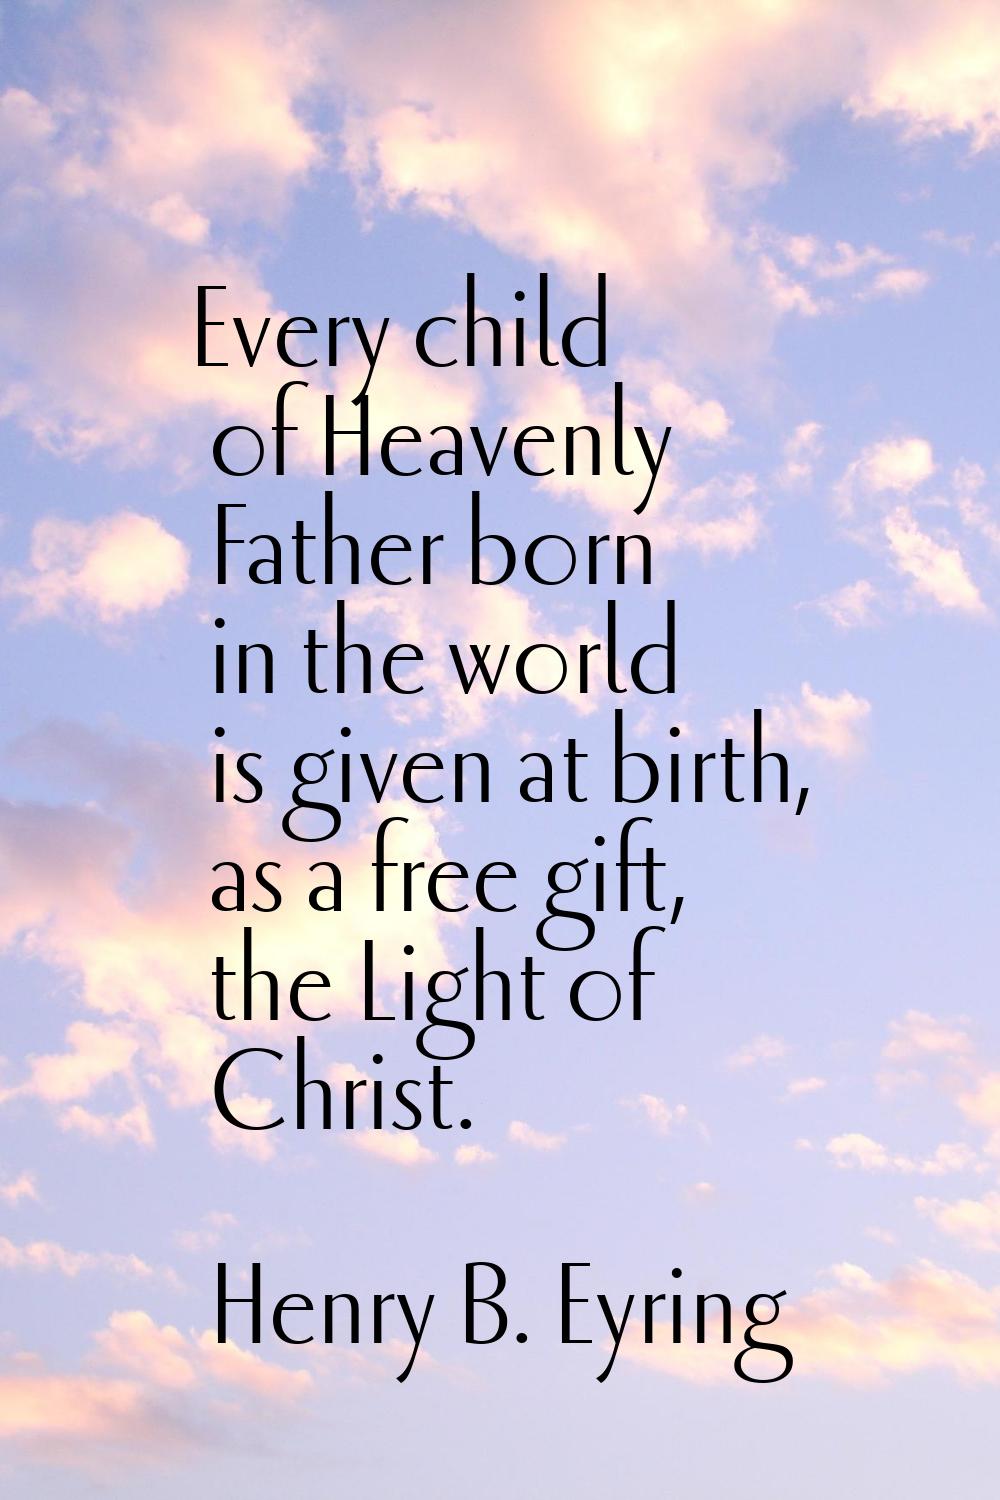 Every child of Heavenly Father born in the world is given at birth, as a free gift, the Light of Ch